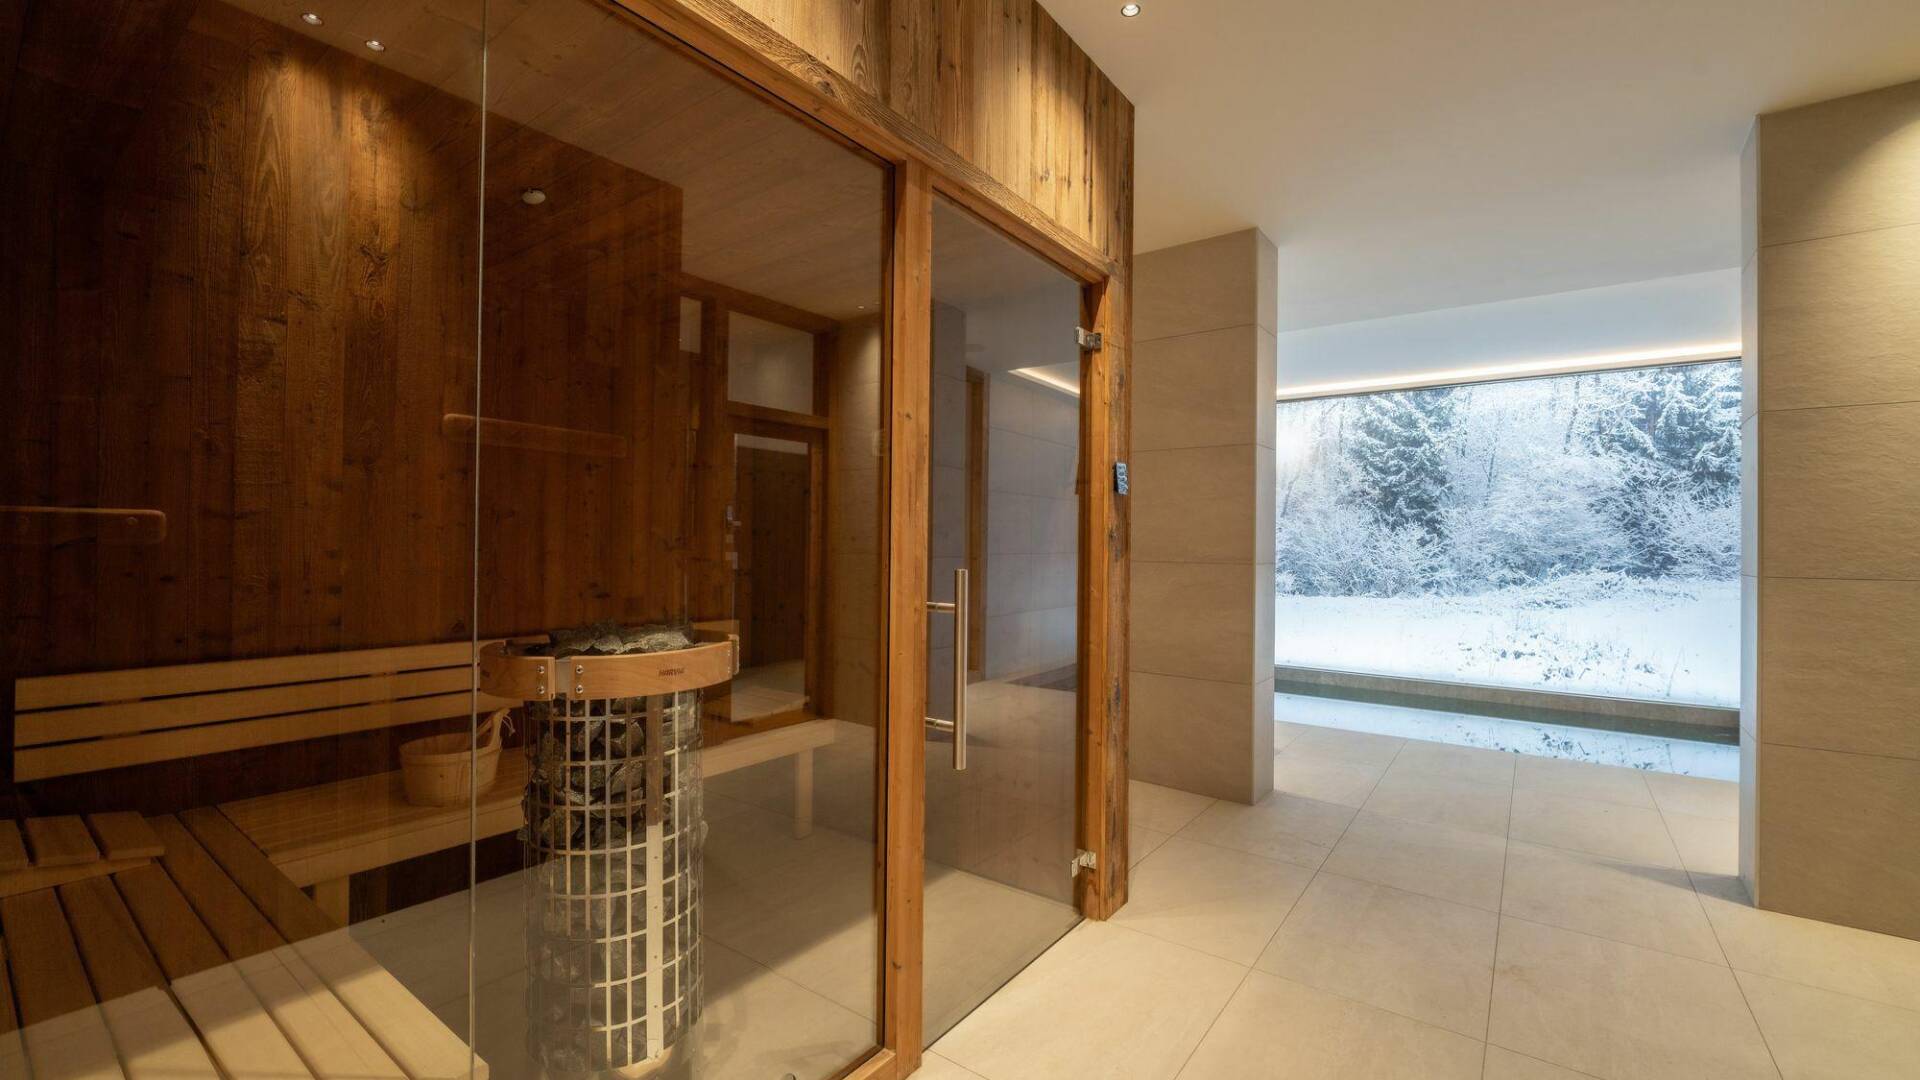 private wellness area with sauna and indoor pool